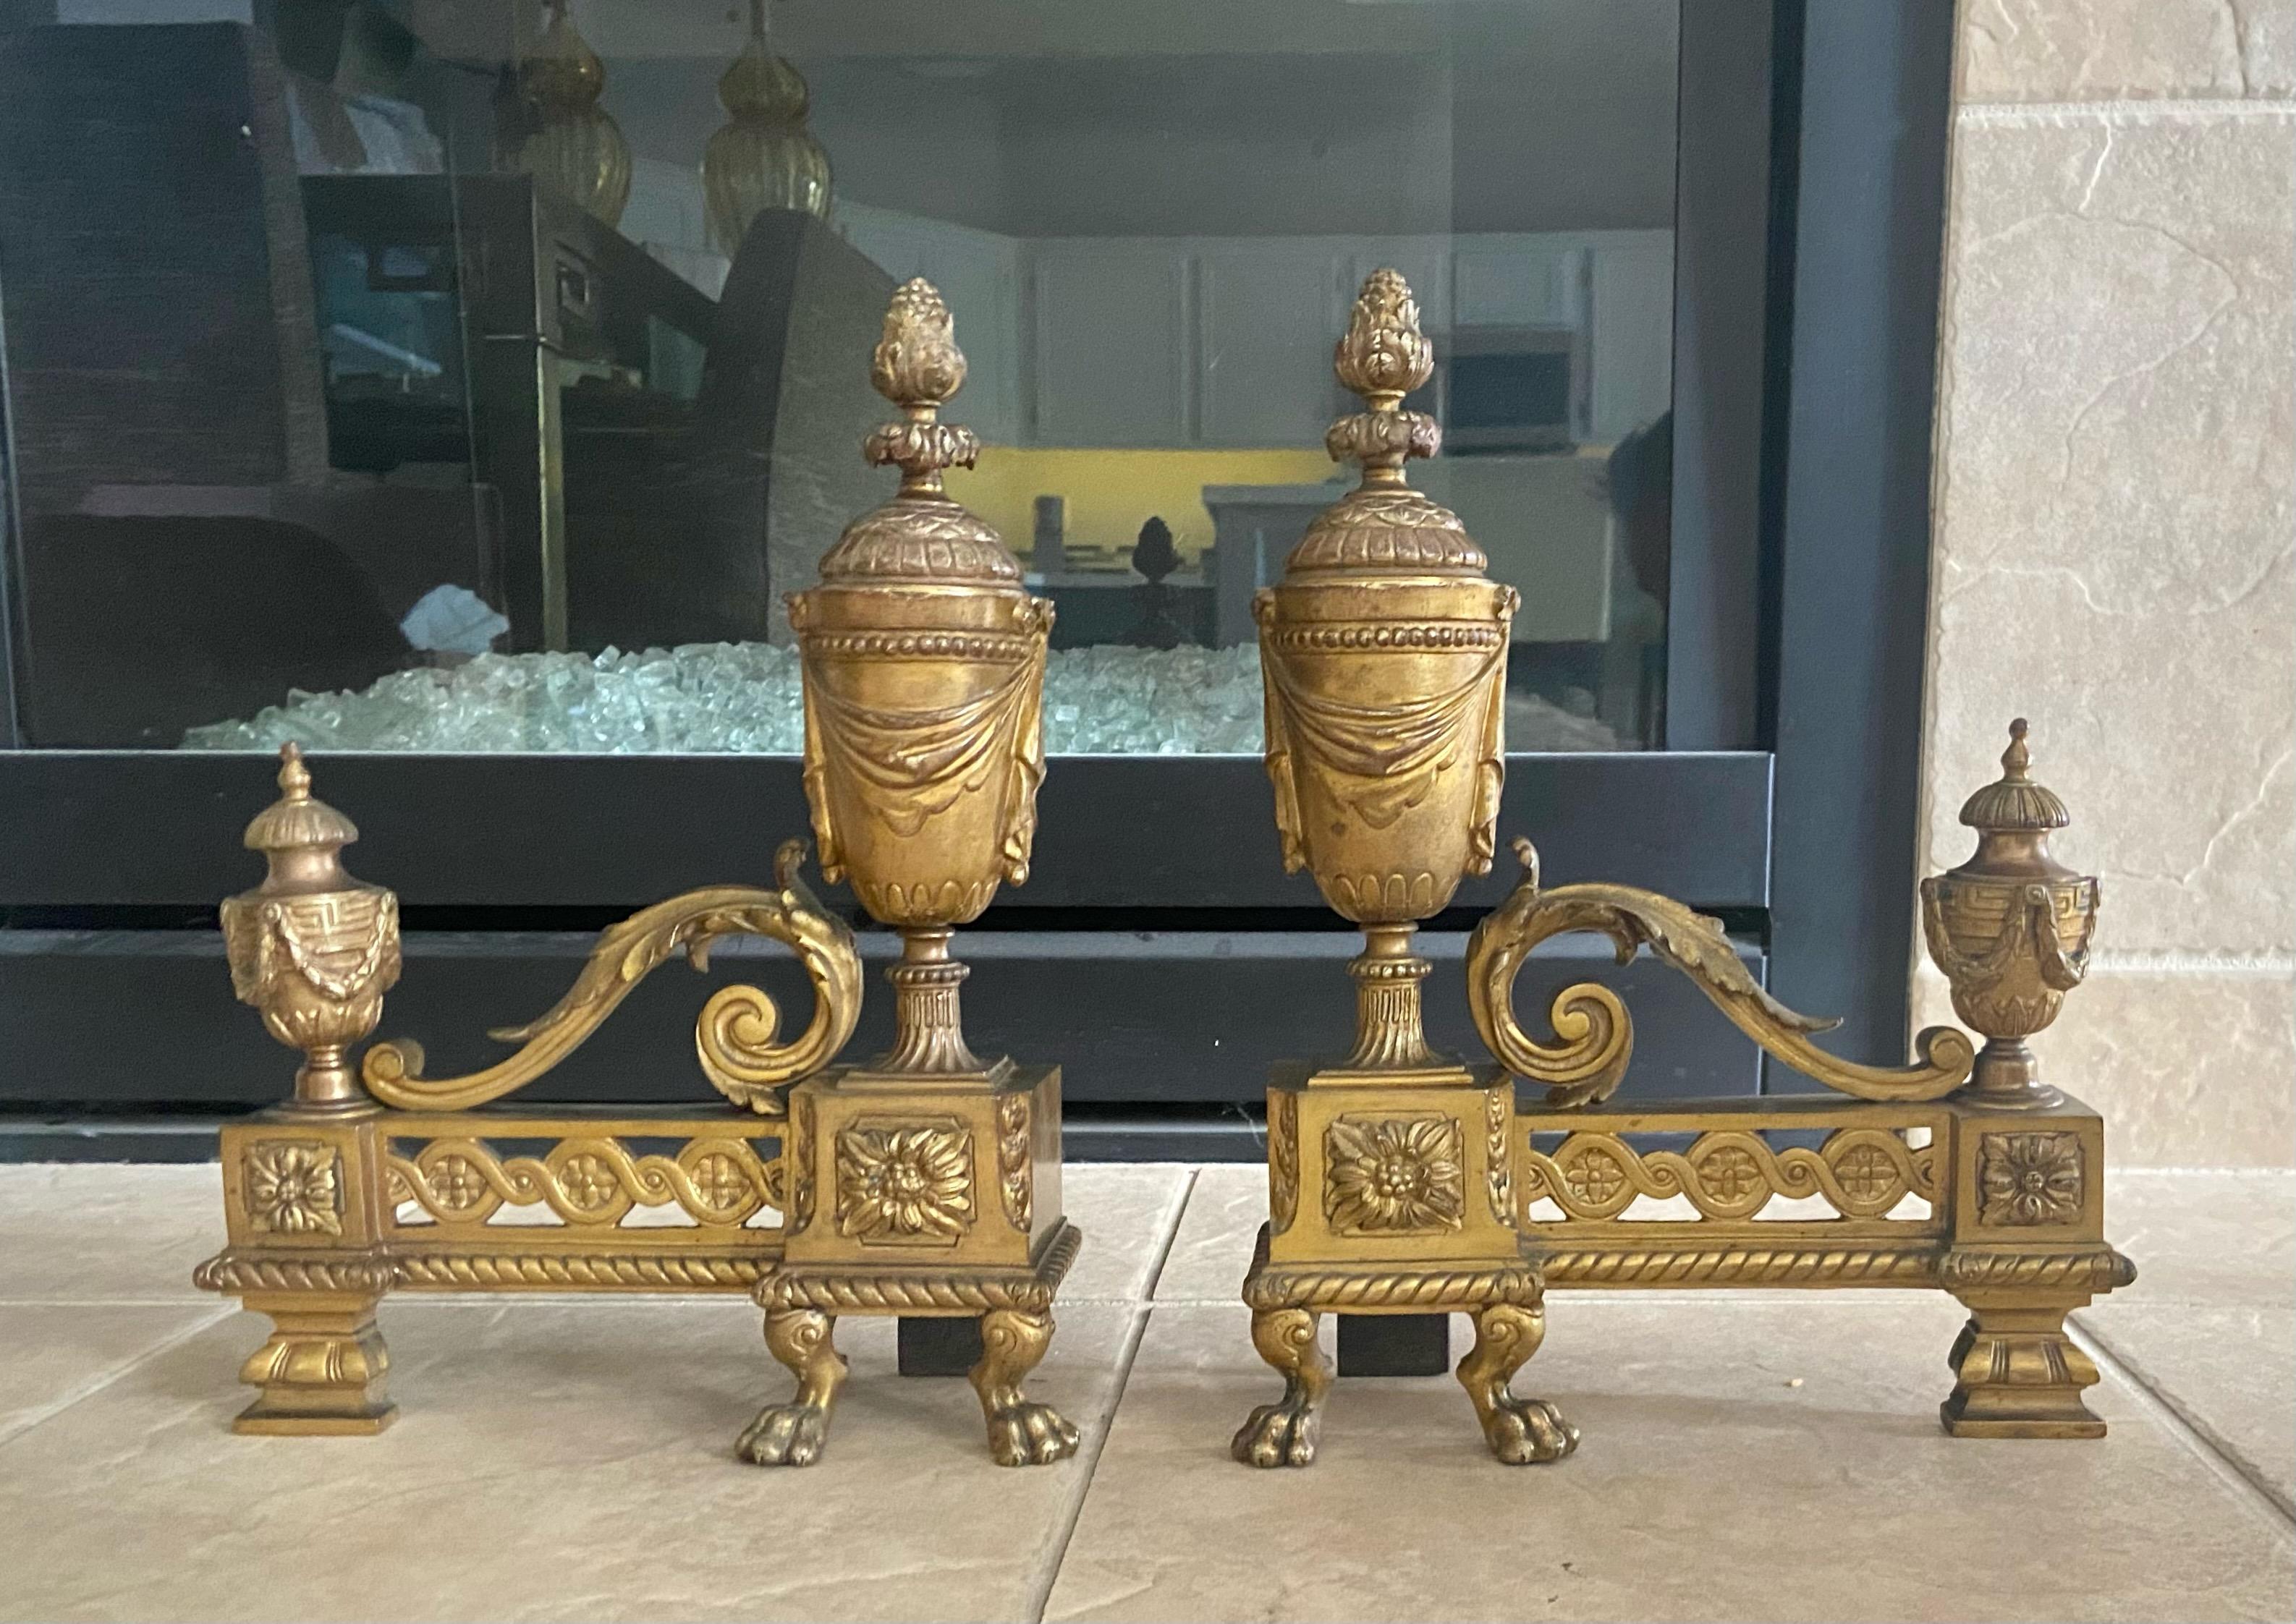 Pair of 19th century French Louis XVI neo-classical style gilt bronze chenets or andirions. 
Finely detailed including urn draped forms and lion paws.